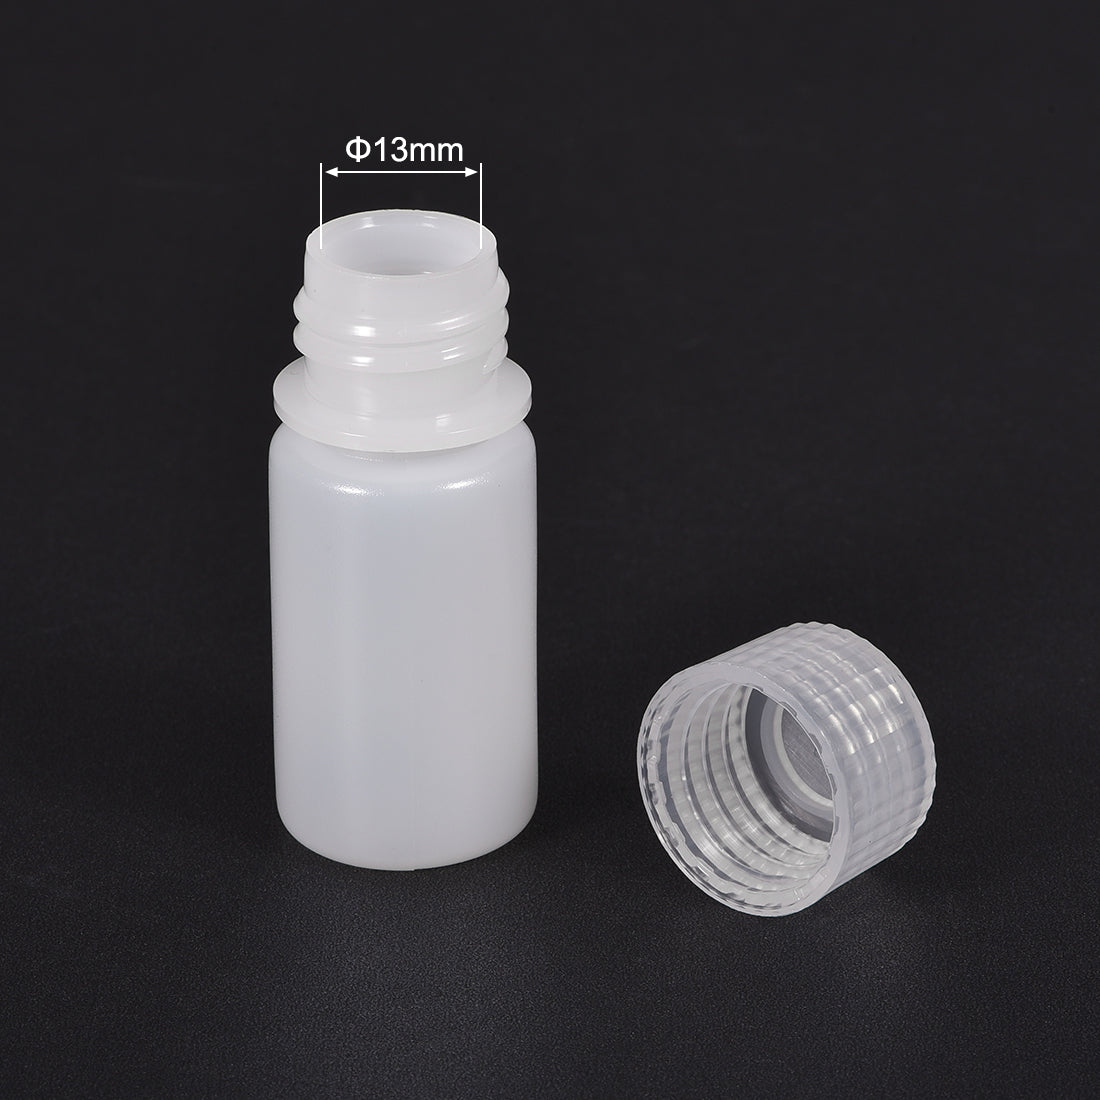 uxcell Uxcell Plastic Lab Chemical Reagent Bottle, 15ml/0.5 oz Small Mouth Sample Sealing Liquid/Solid Storage Bottles, White 12pcs